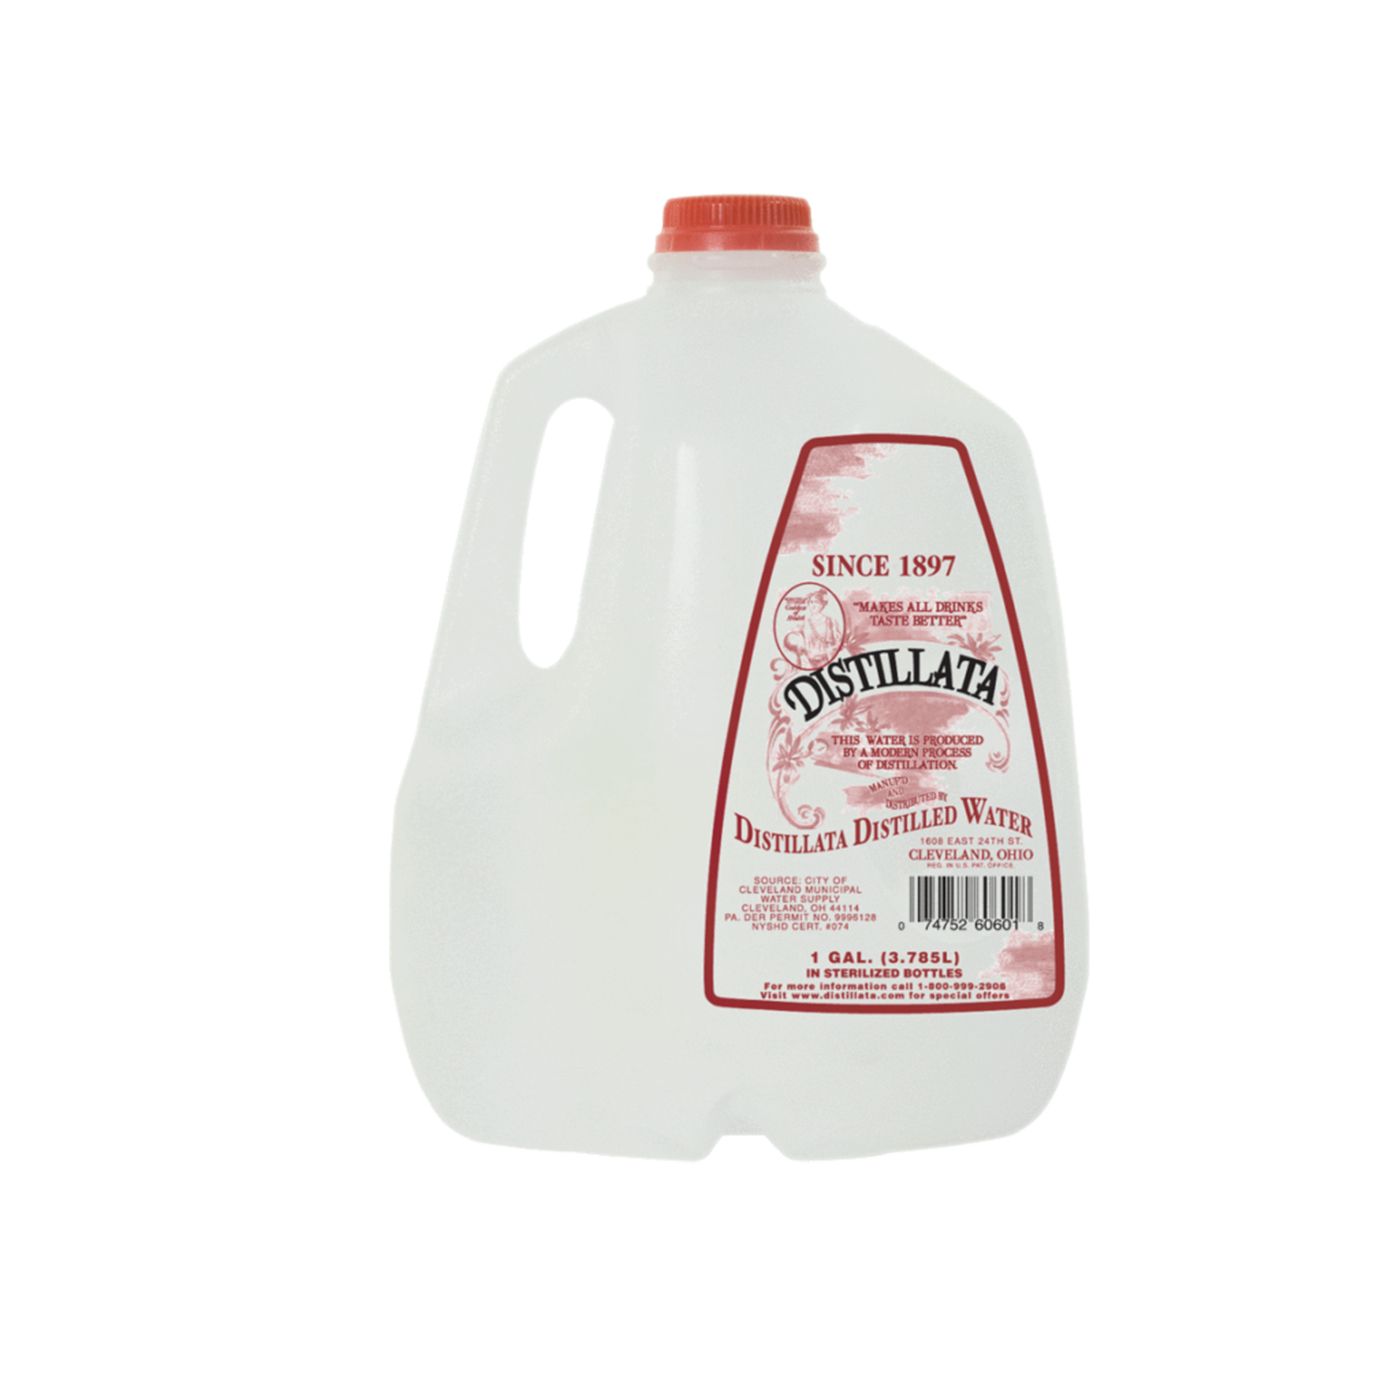 Pure Life Distilled Water - 1gal Bottle